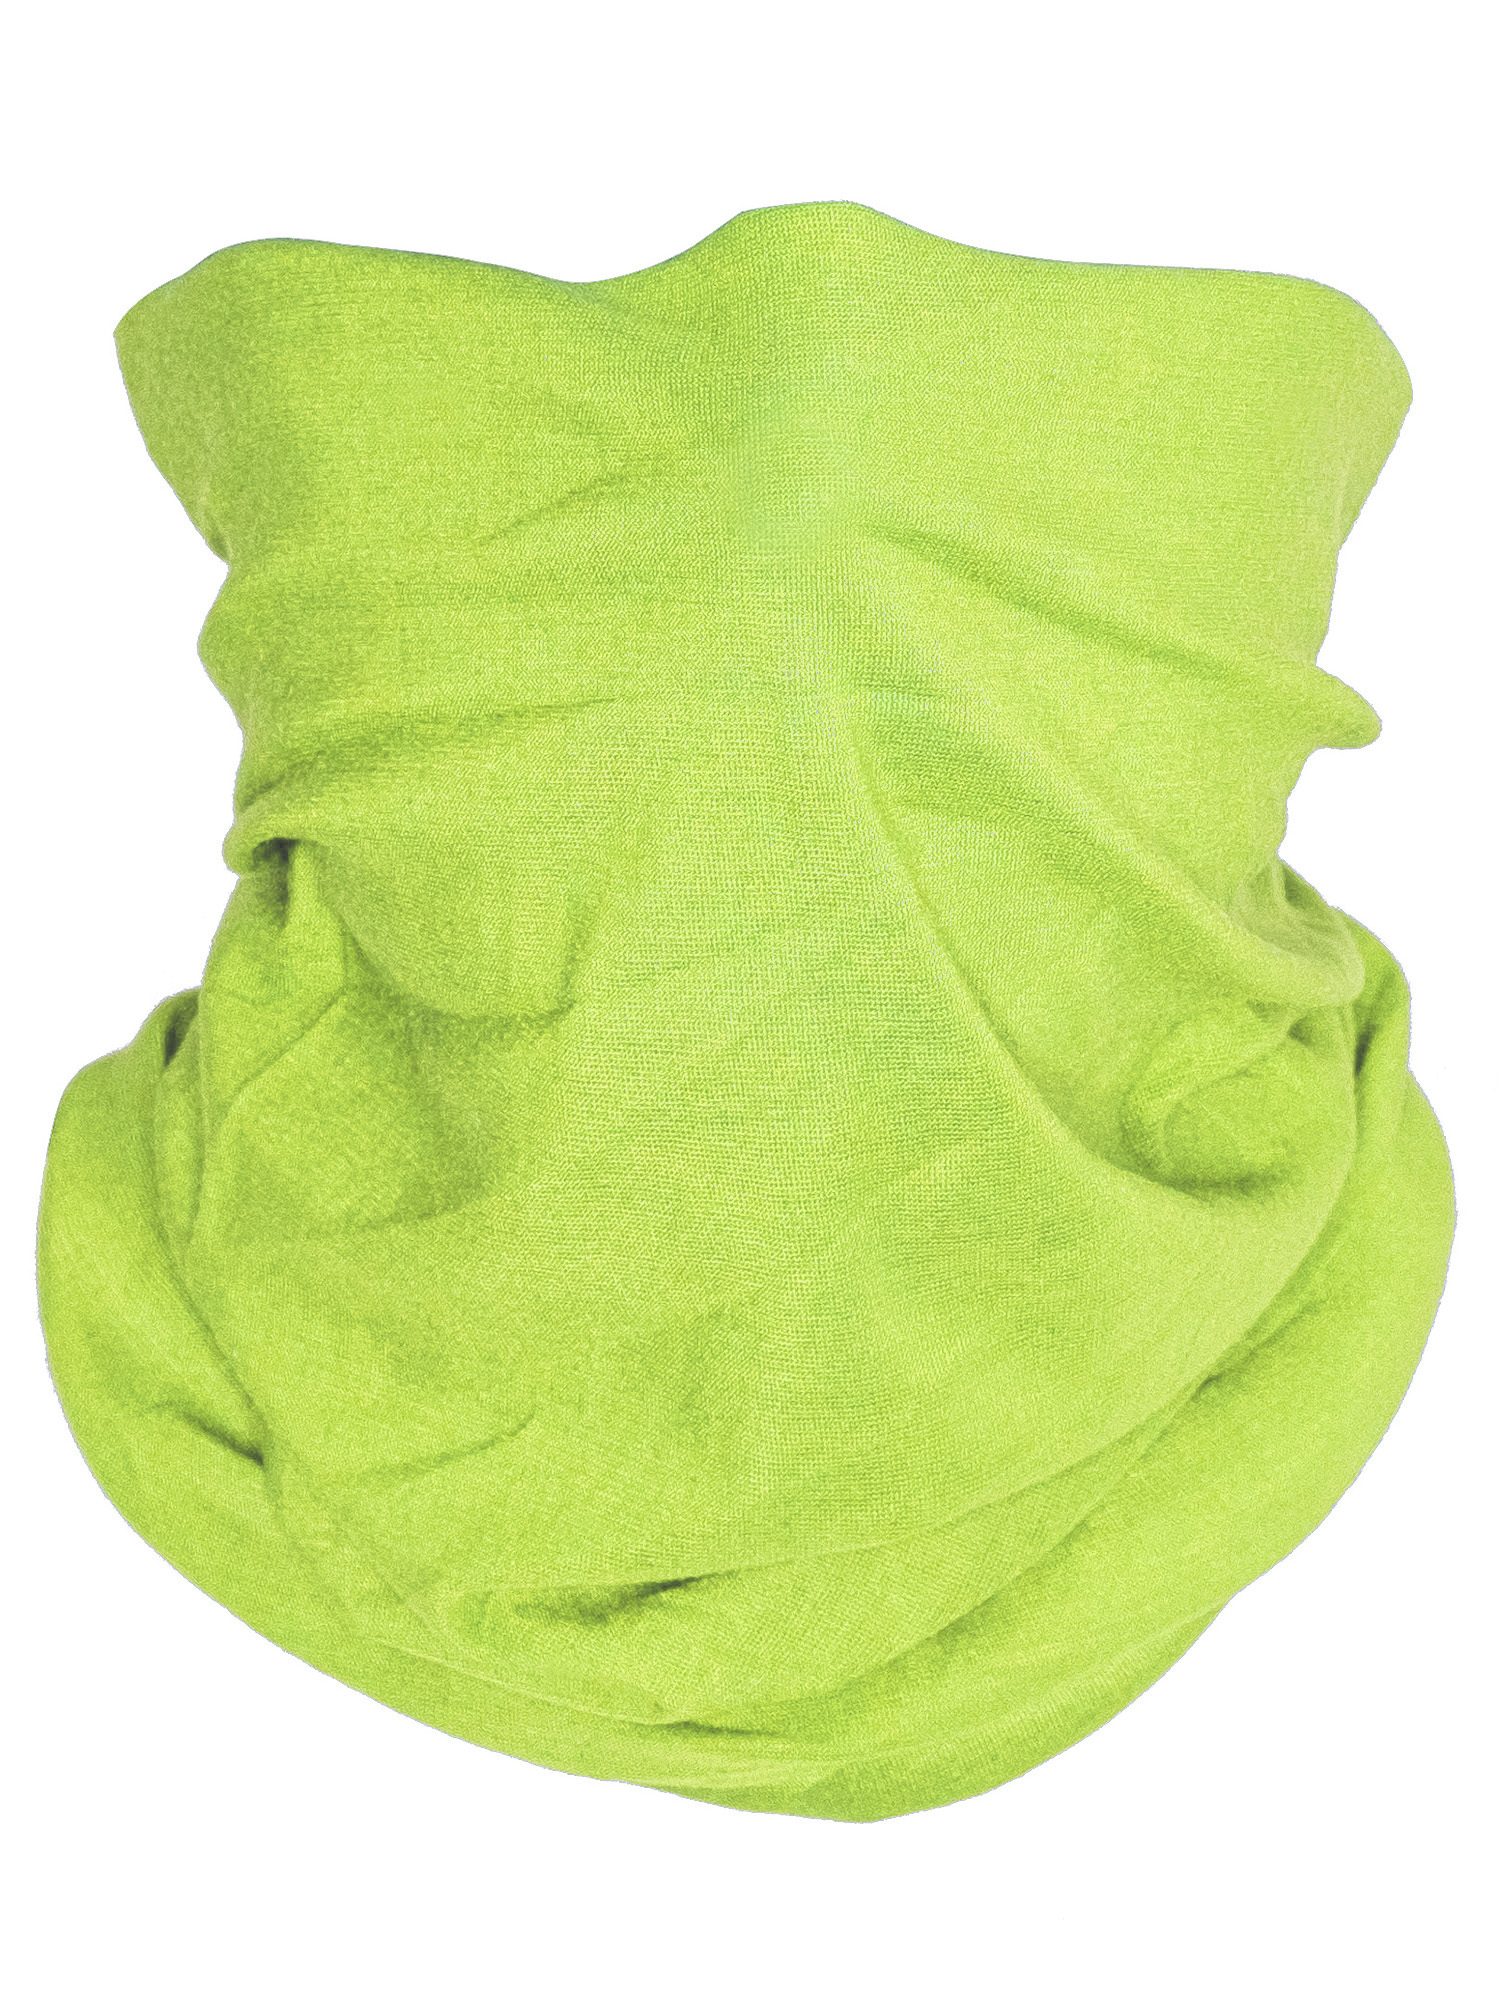 Top Headwear Multifunctional Face Covering Neck Gaiter Scarf - Neon Yellow - image 1 of 2